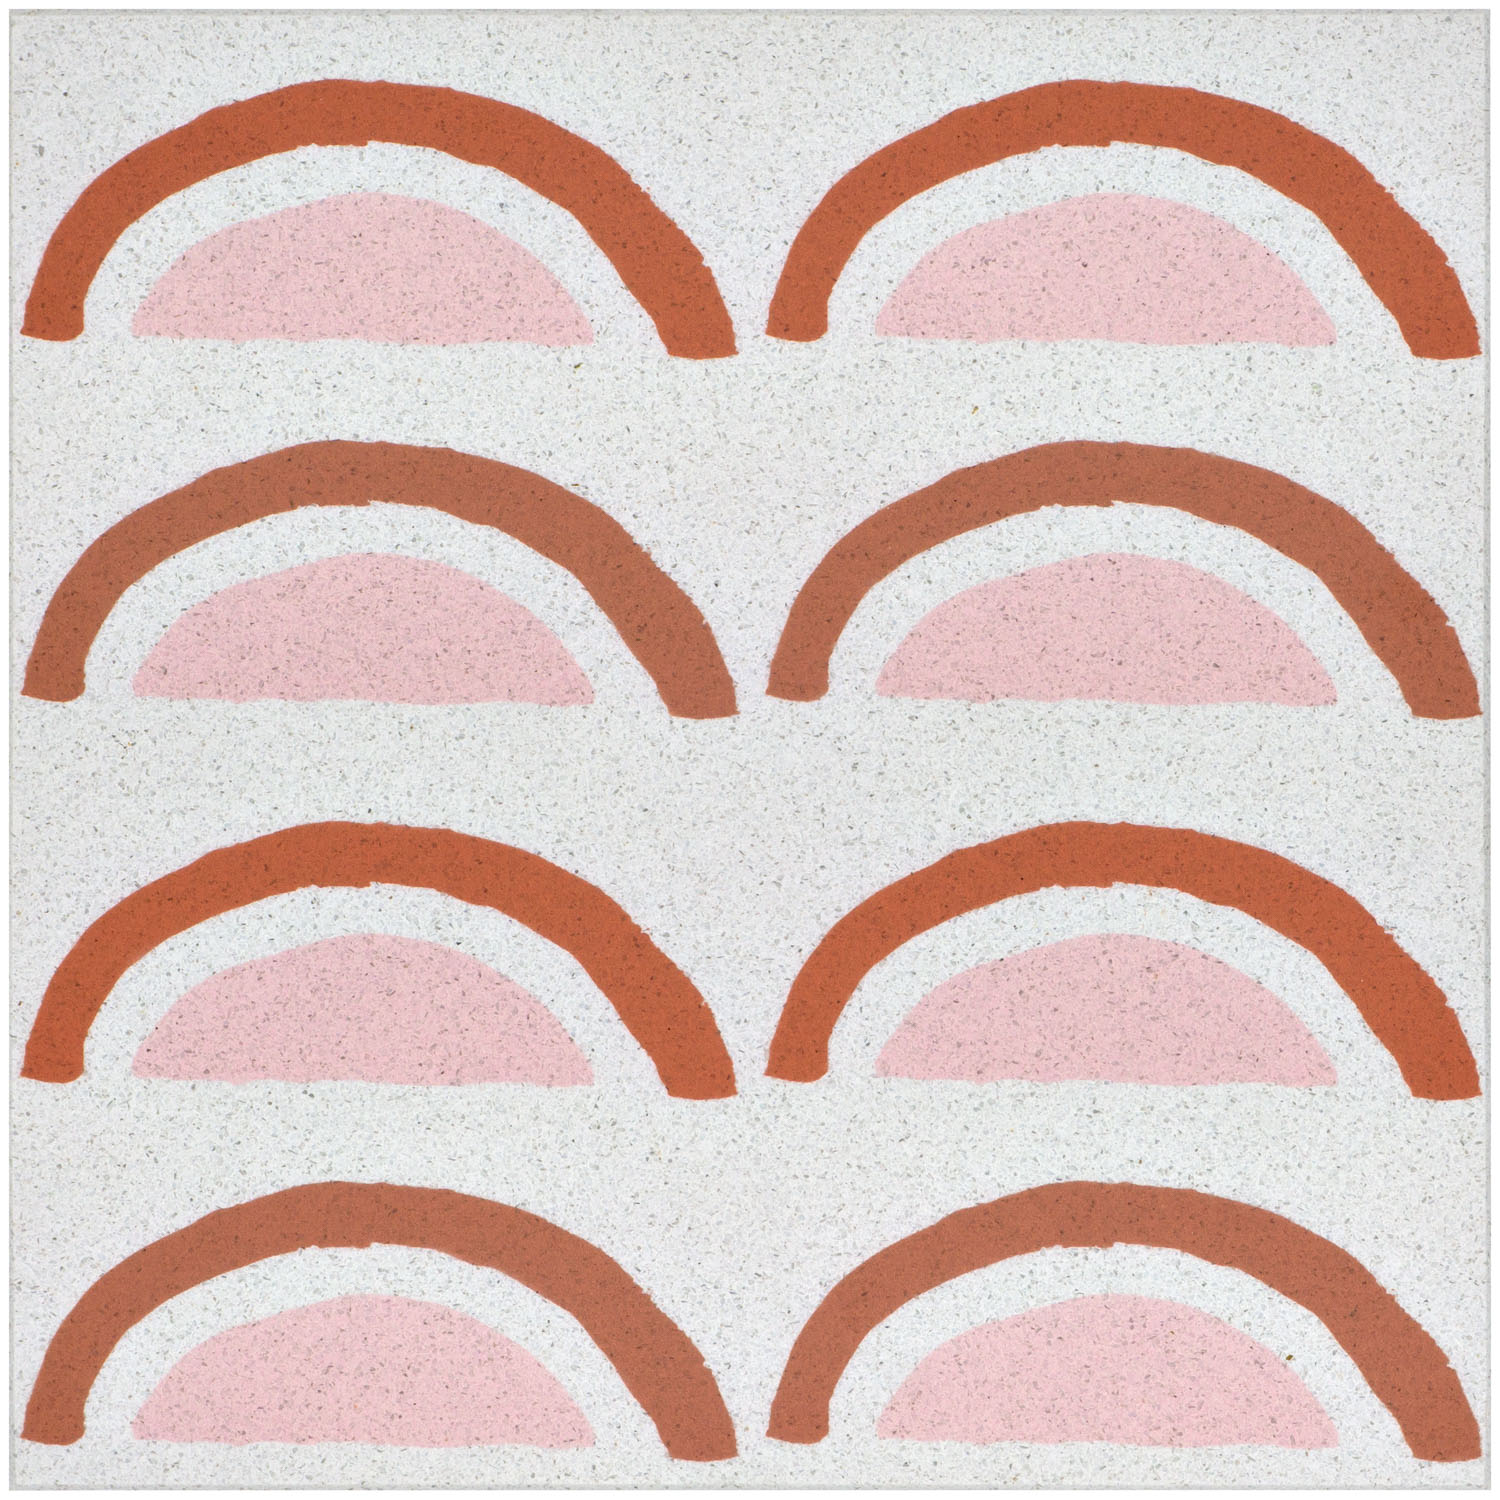 Livden tile red and pink arcs